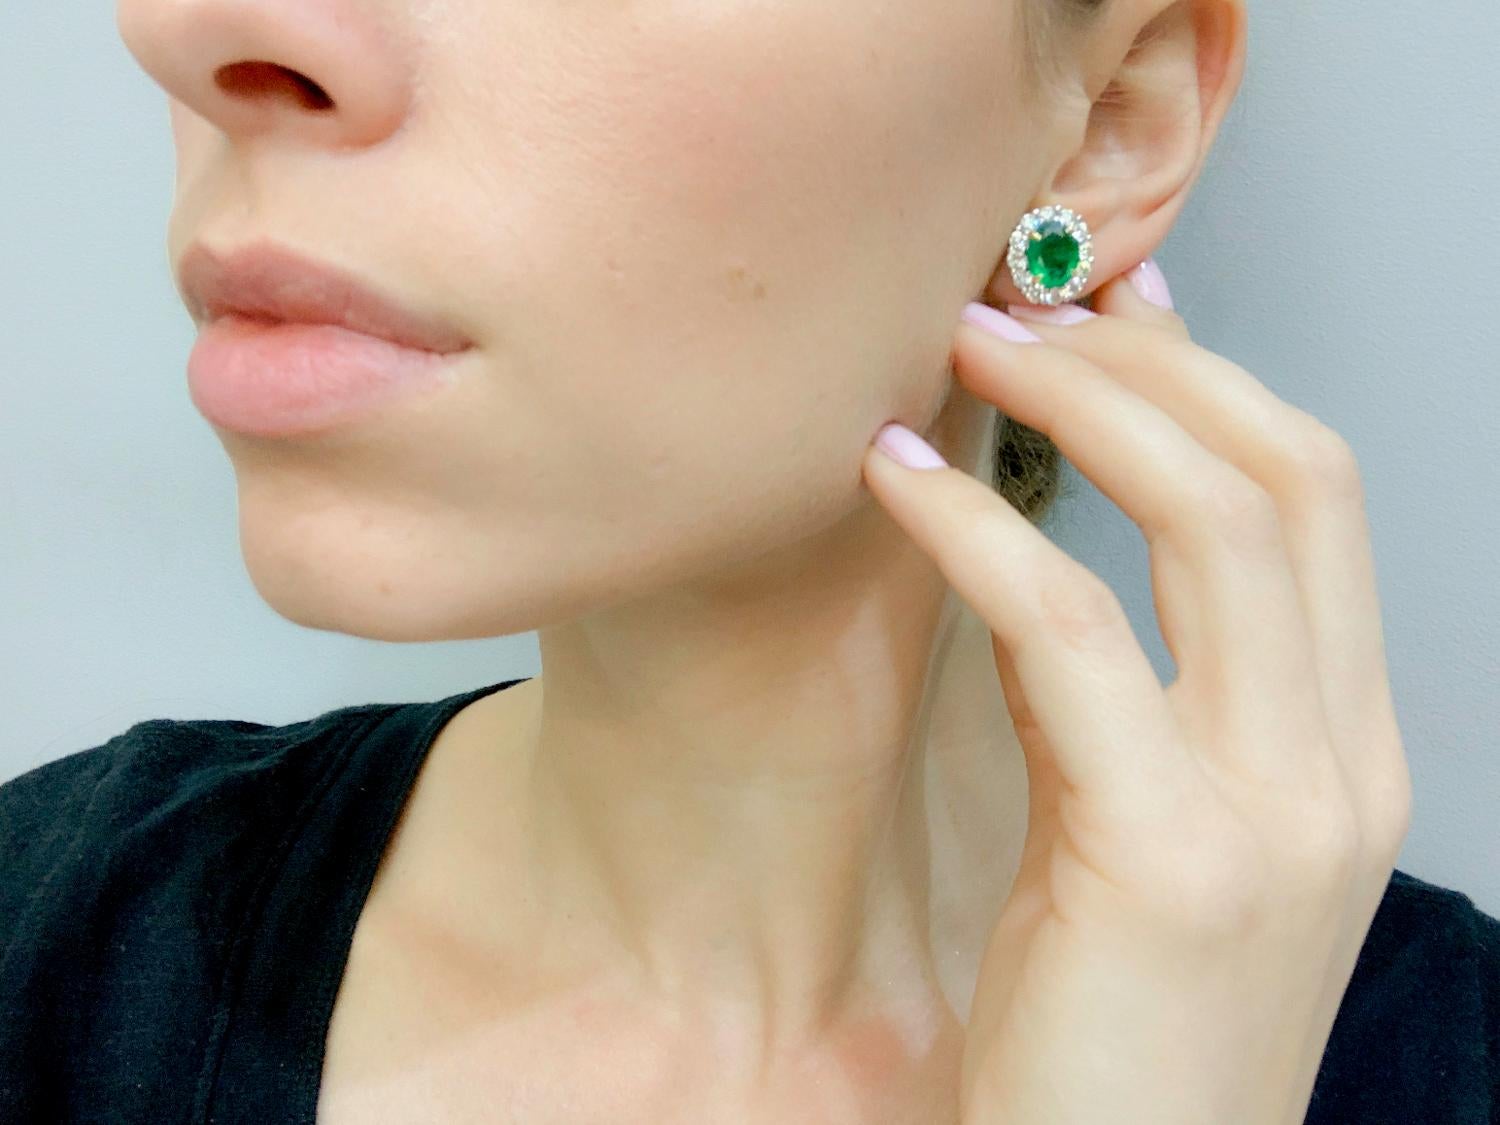 Introducing our stunning Diamond and Emerald Earrings, a dazzling fusion of classic elegance and the timeless allure of precious gemstones. These earrings are designed to adorn your ears with sophistication, featuring the enchanting sparkle of white